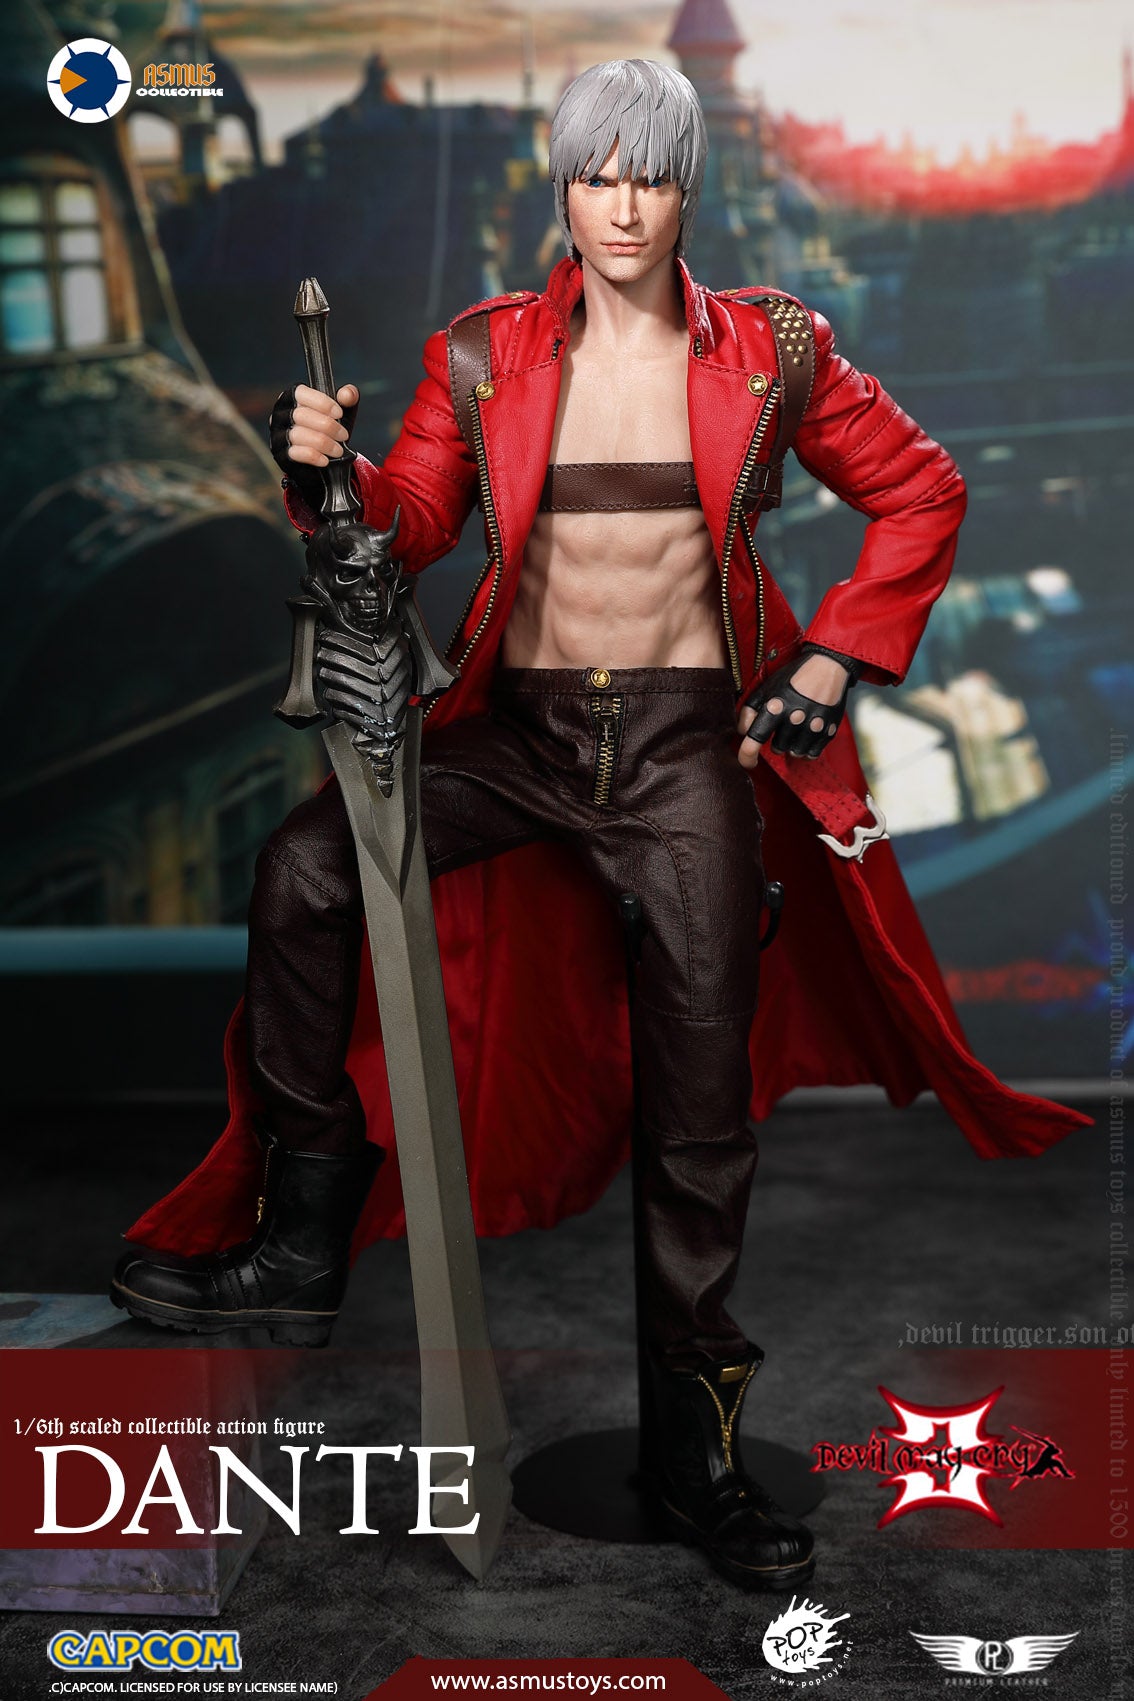 Devil May Cry 3 Dante 1:6 Scale Luxury Edition Action Figure